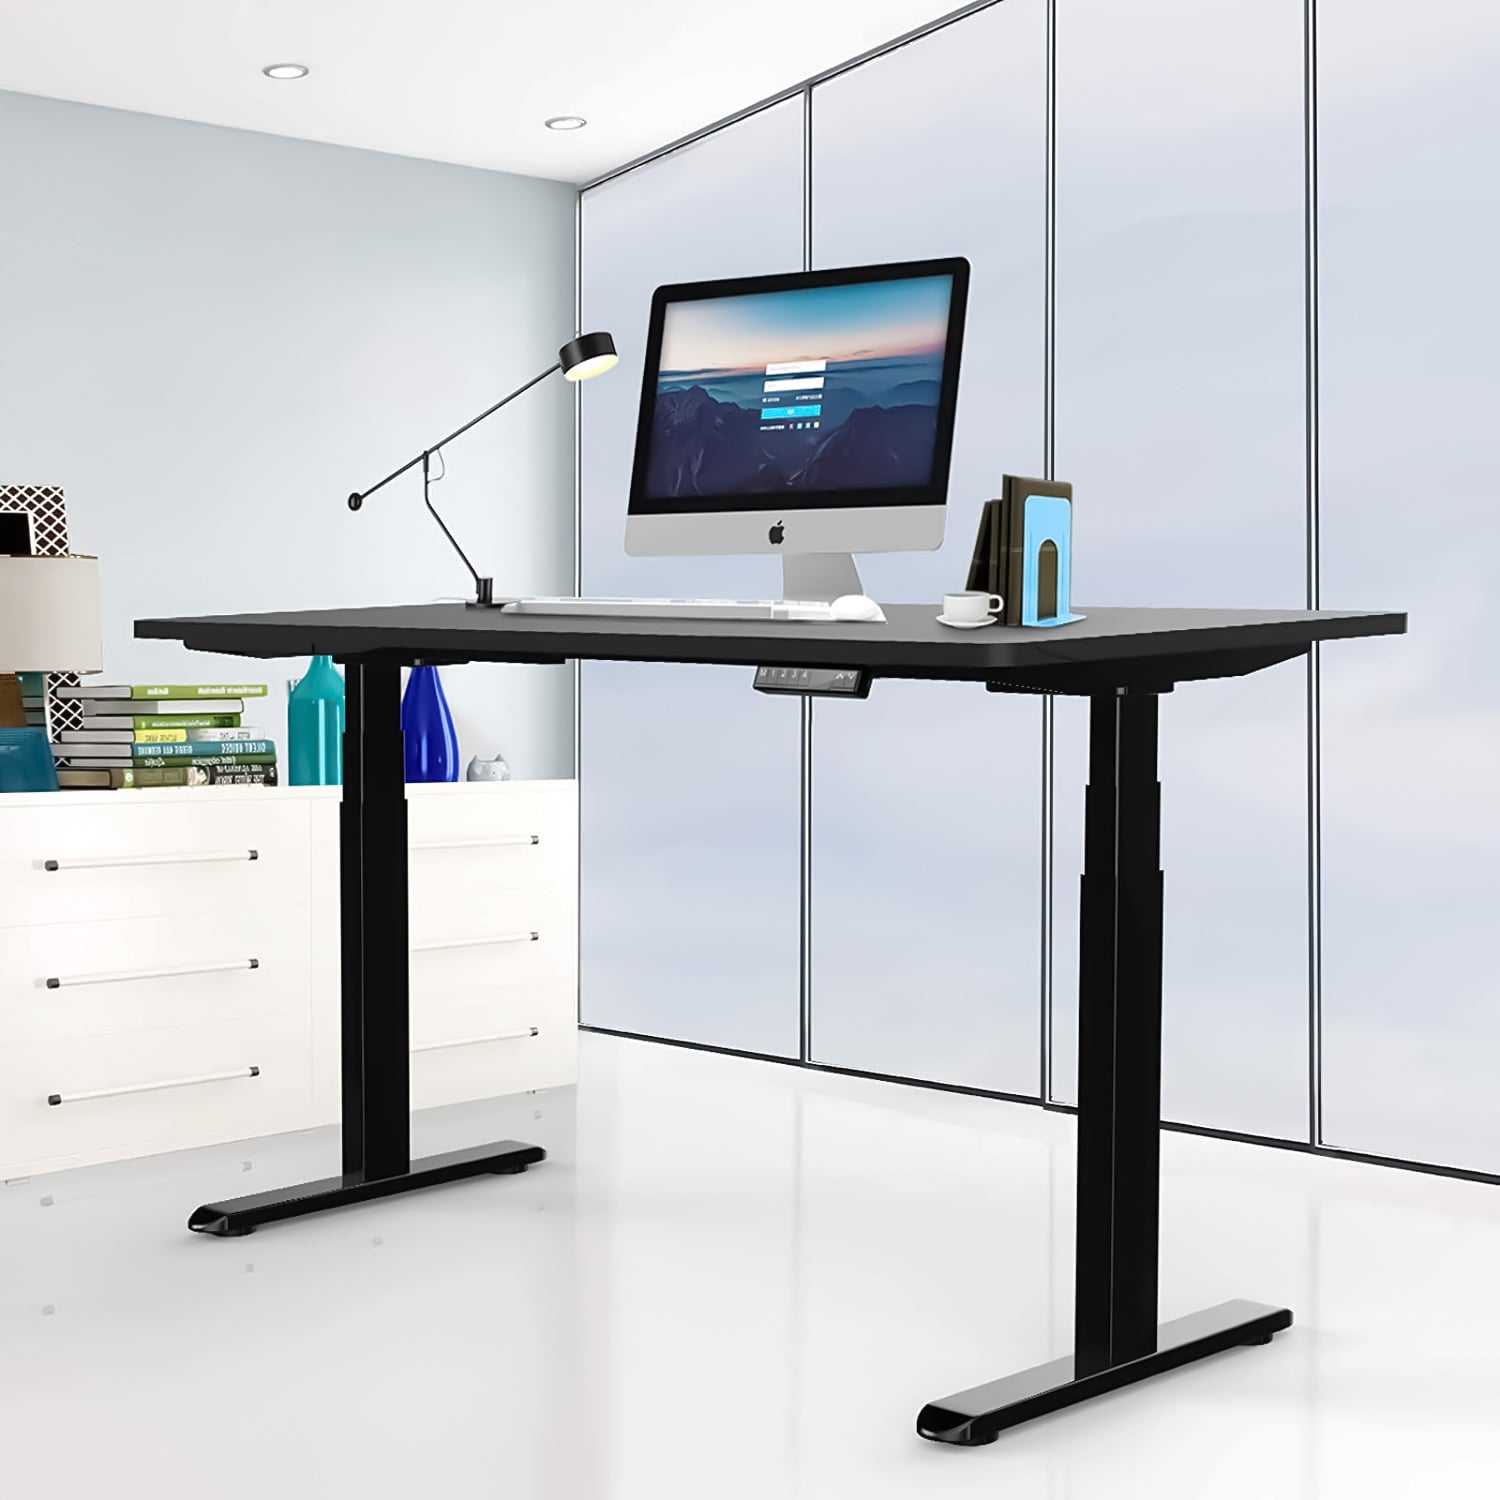 Height Adjustable Table Legs Sit Stand Desk Frame